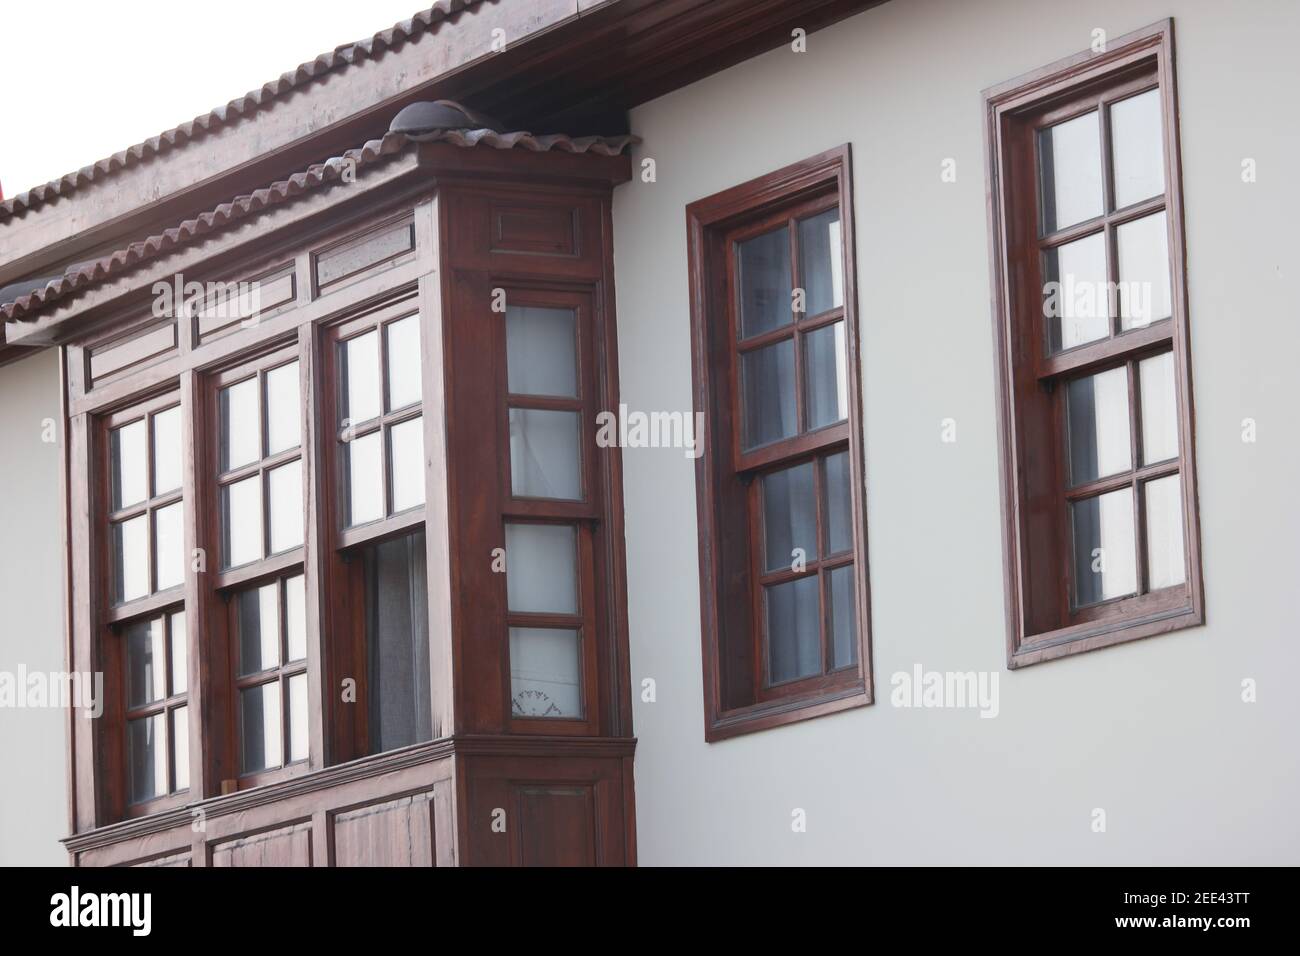 Facade of traditional house at turkish town. Stock Photo